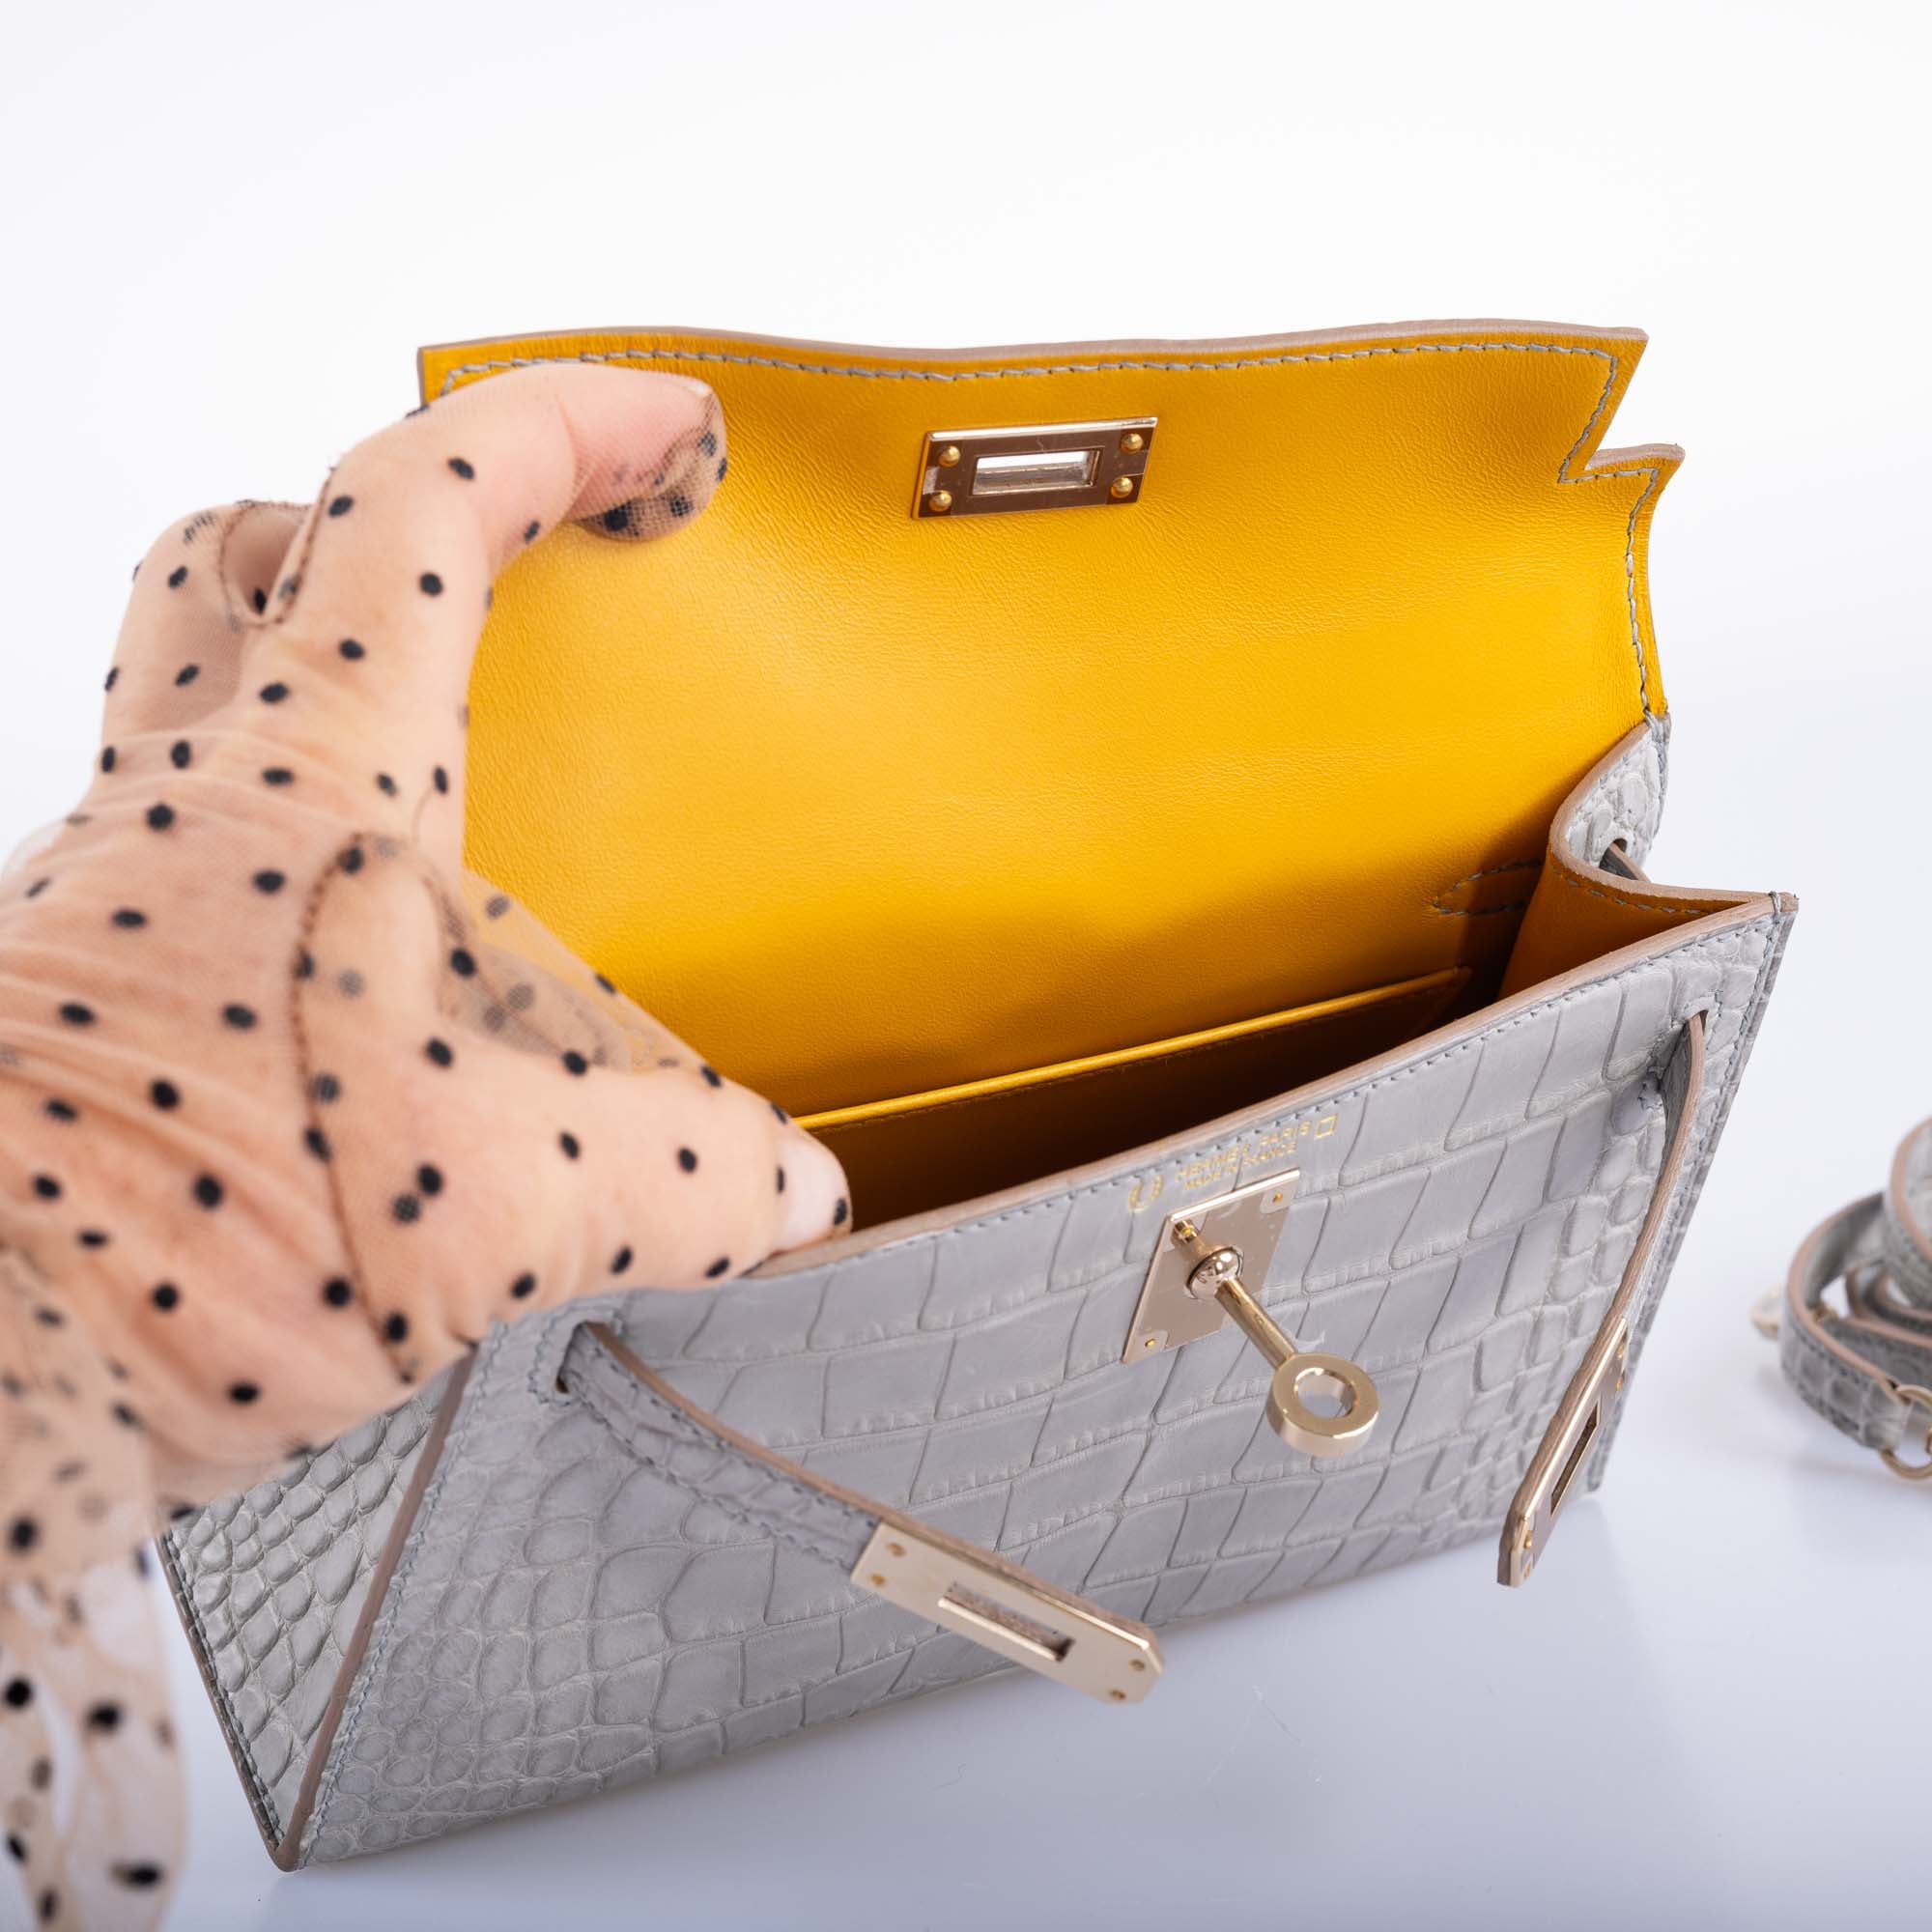 Hermès Kelly 20 HSS Mini Sellier Gris Perle Matte Alligator with a Jaune Ambre interior and Permabrass Hardware